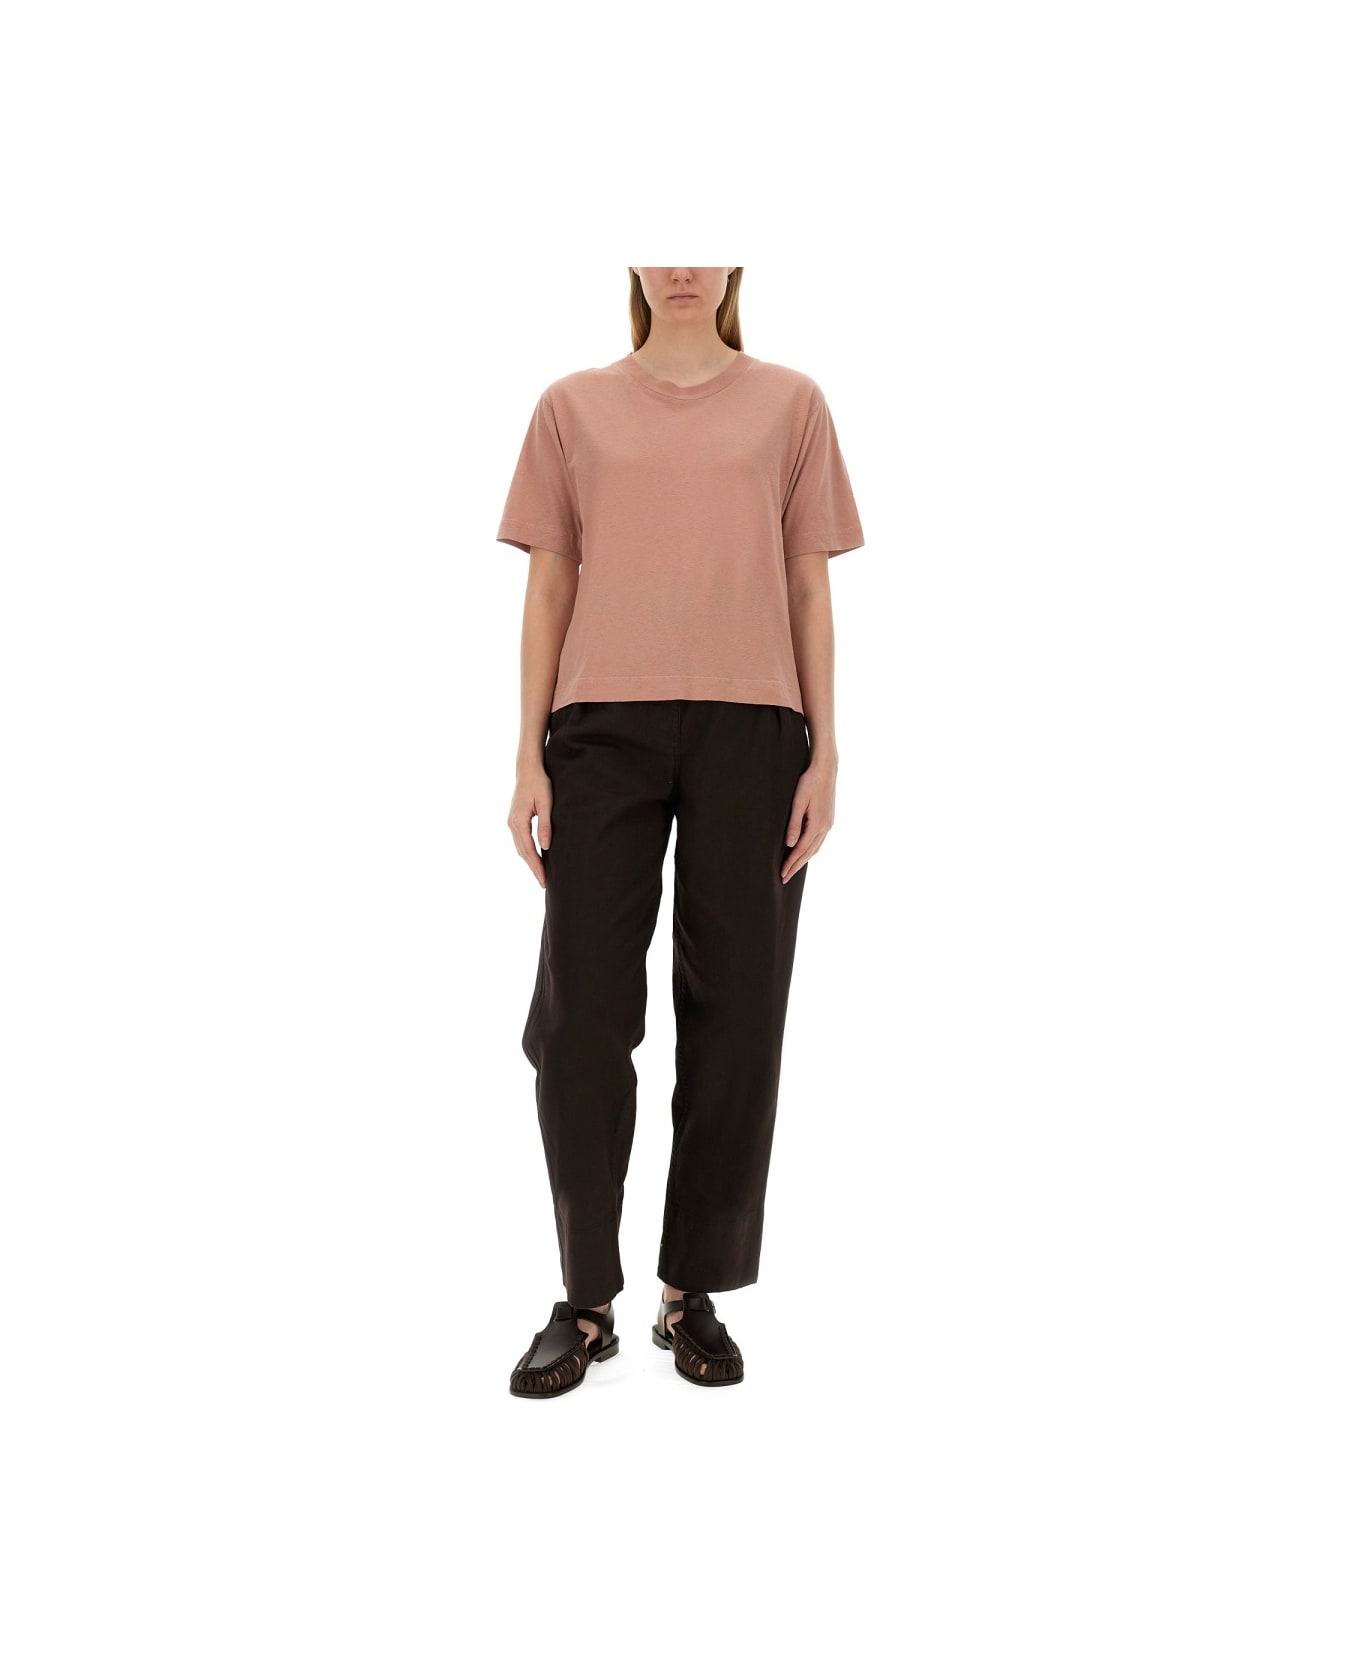 Margaret Howell Simple T-shirt - PINK